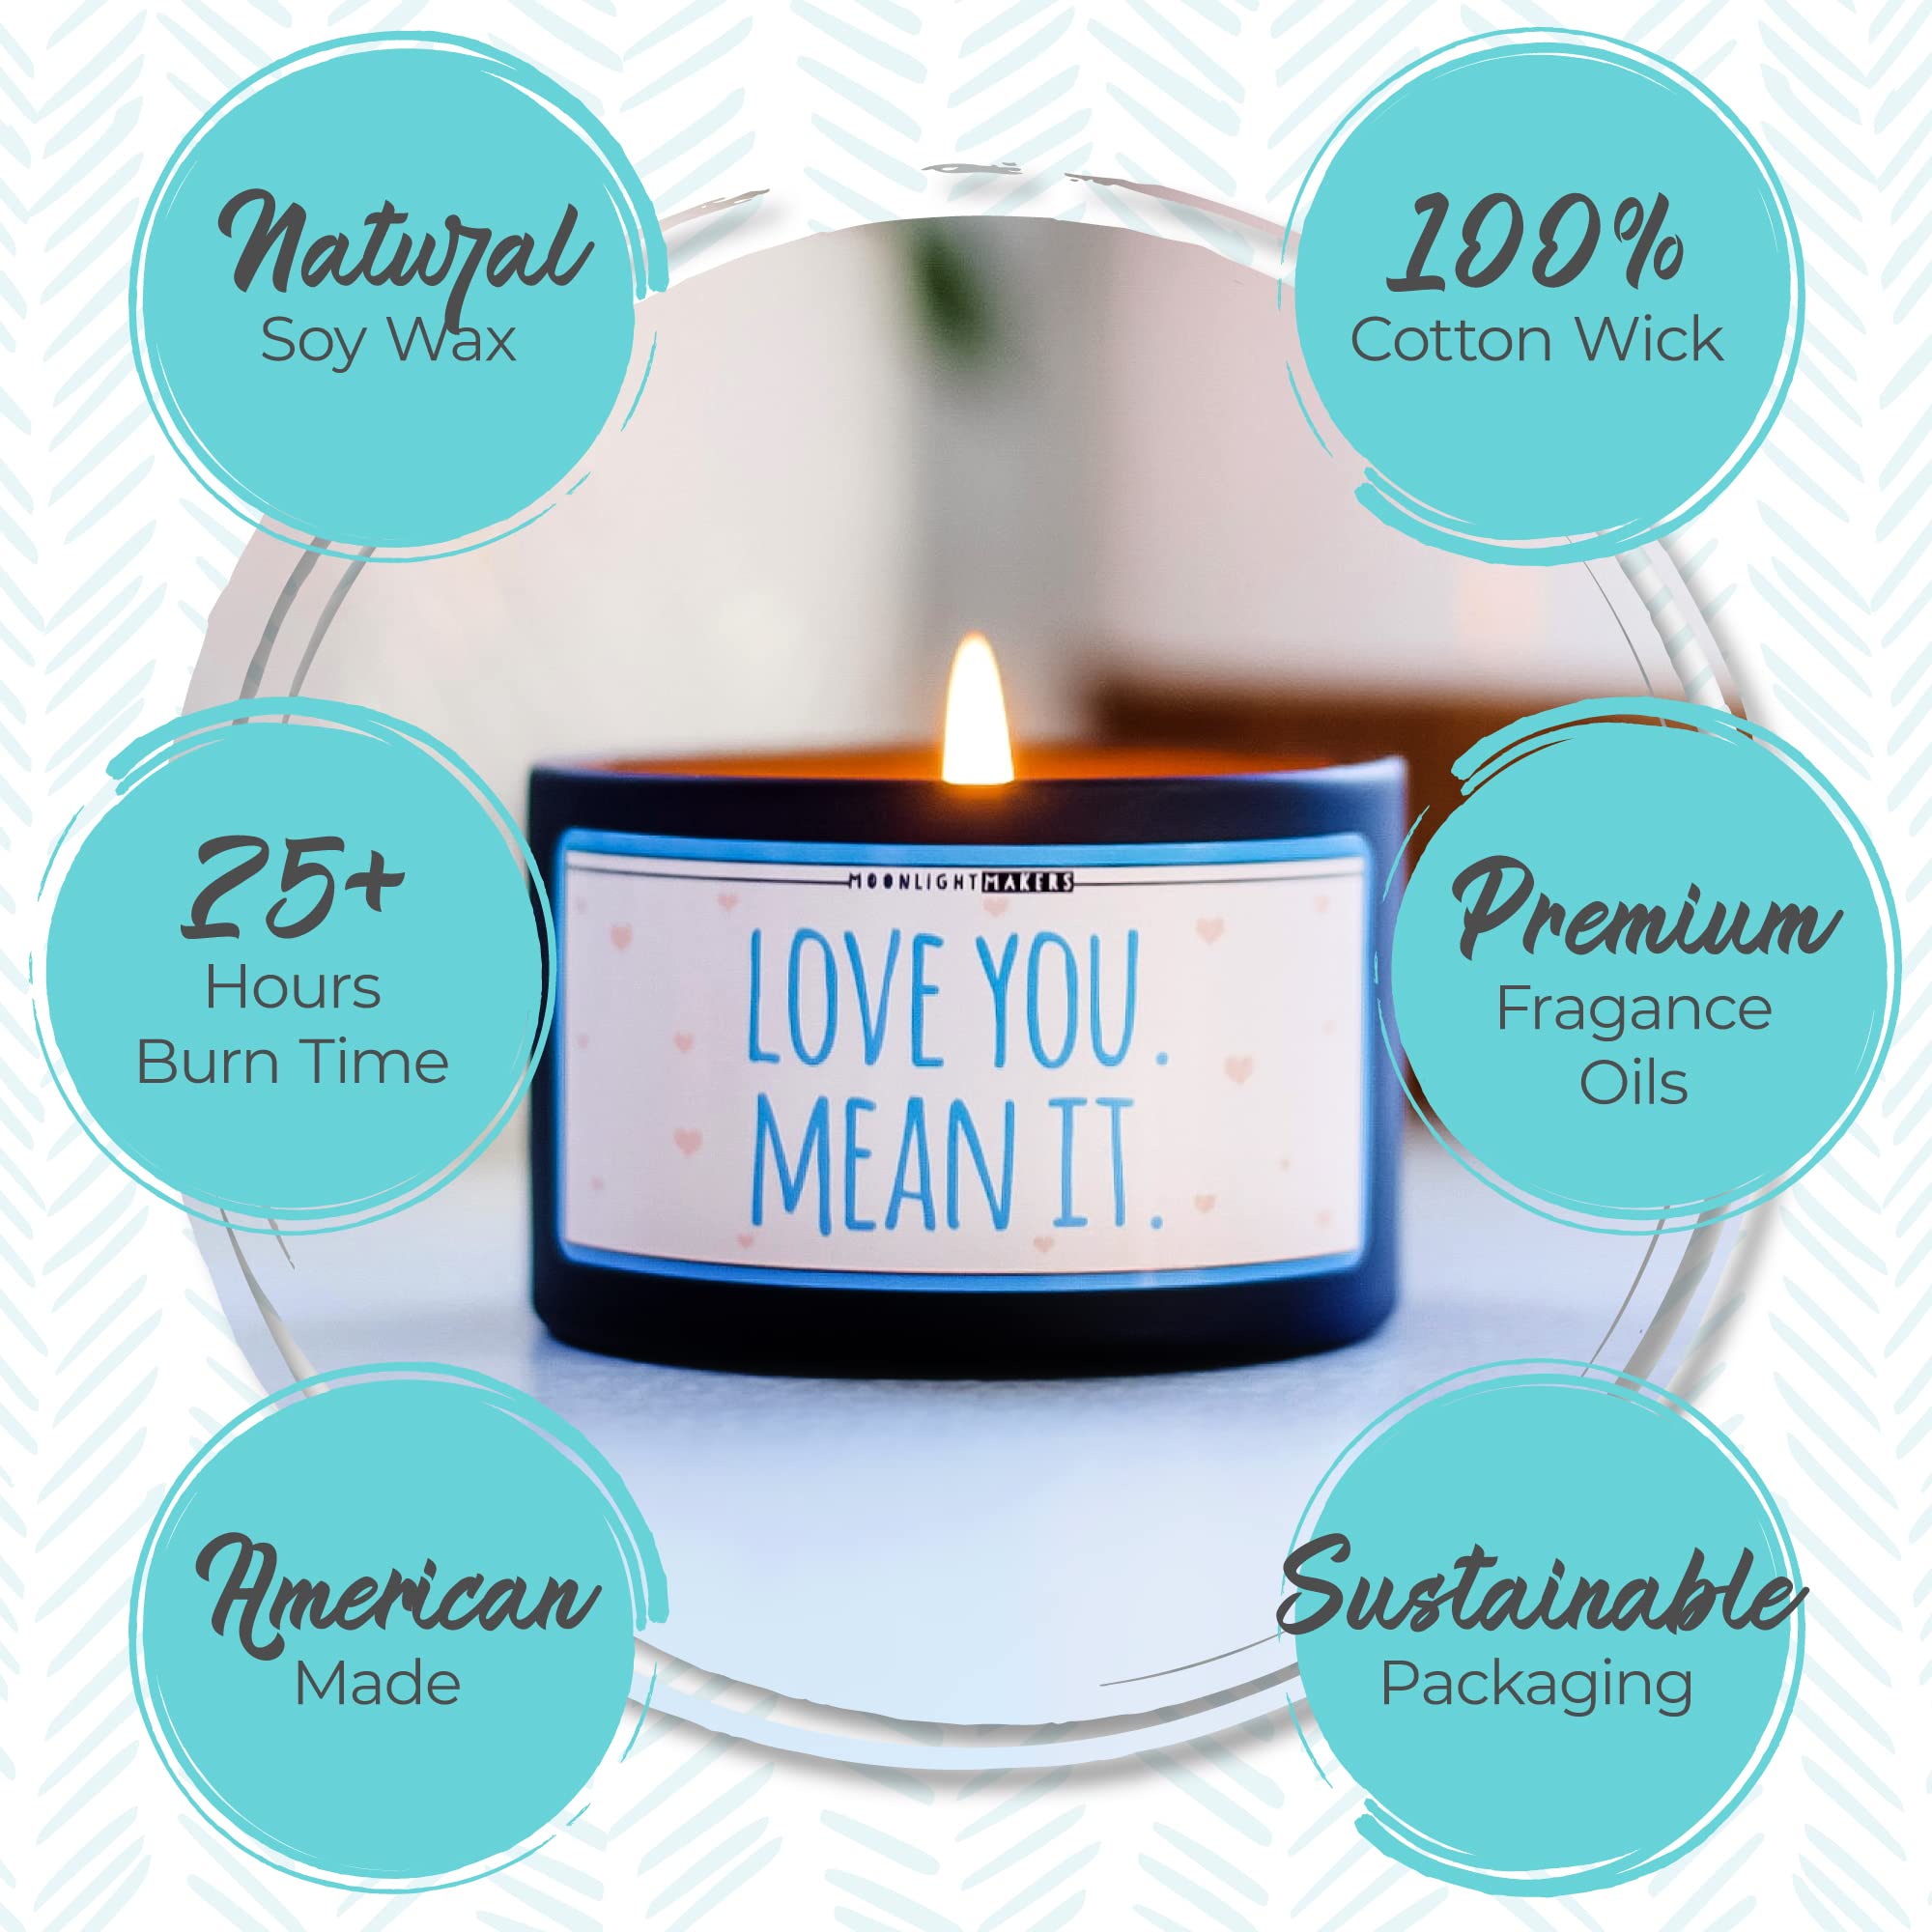 Moonlight Makers Look At You All Smart And Stuff Candle, Frosted Juniper Scented Handmade Candle, Natural Soy Wax Candle, 25+ Hour Burn Time, 8oz Tin